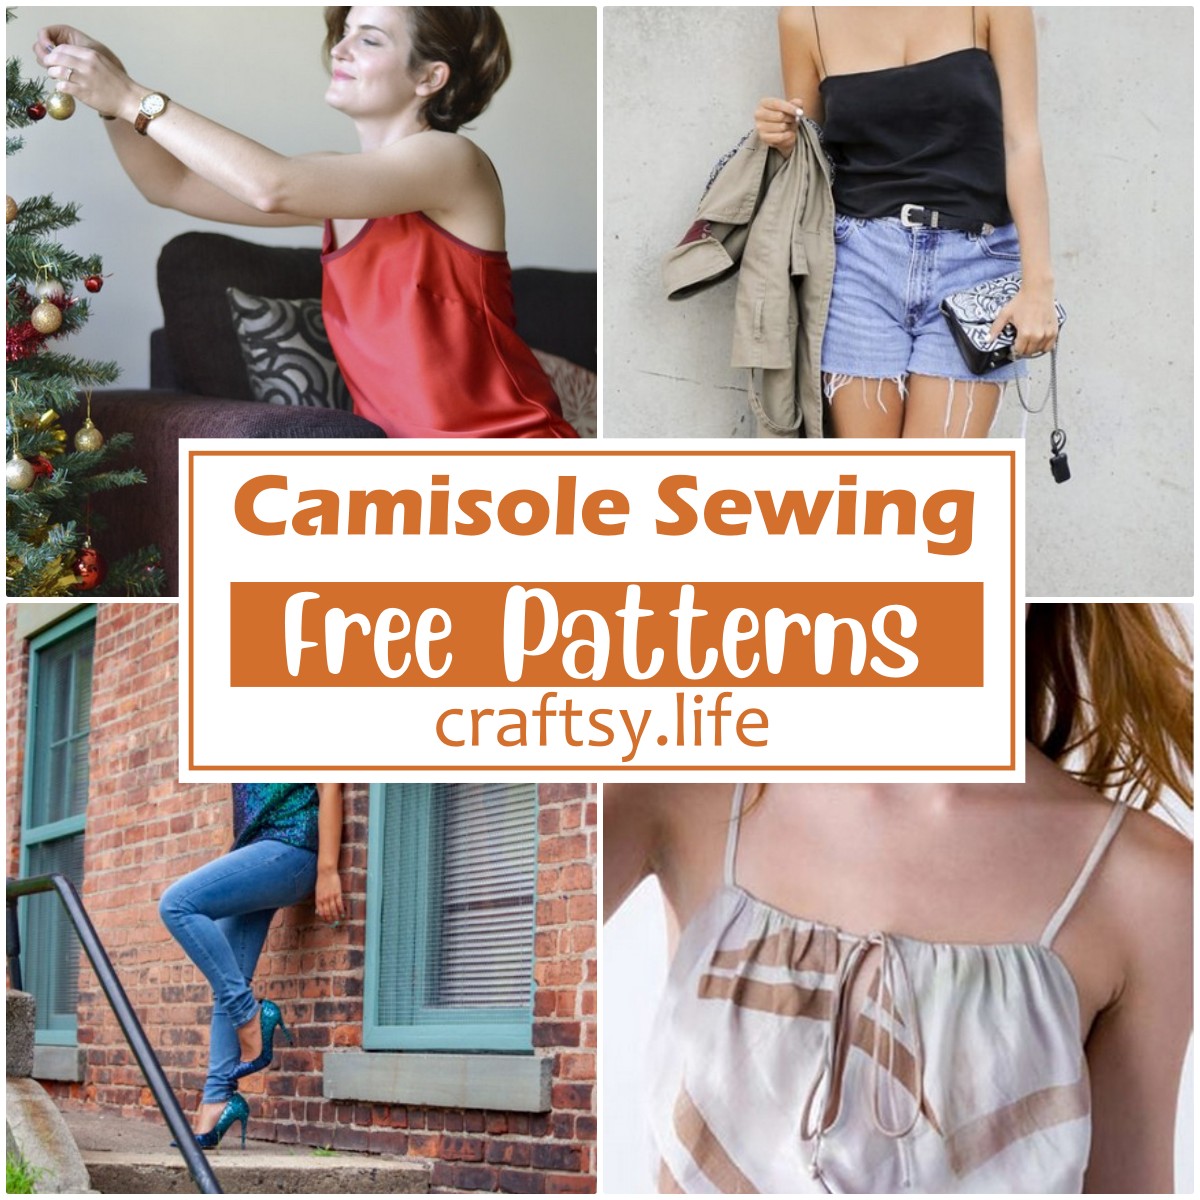 Free Camisole Sewing Patterns